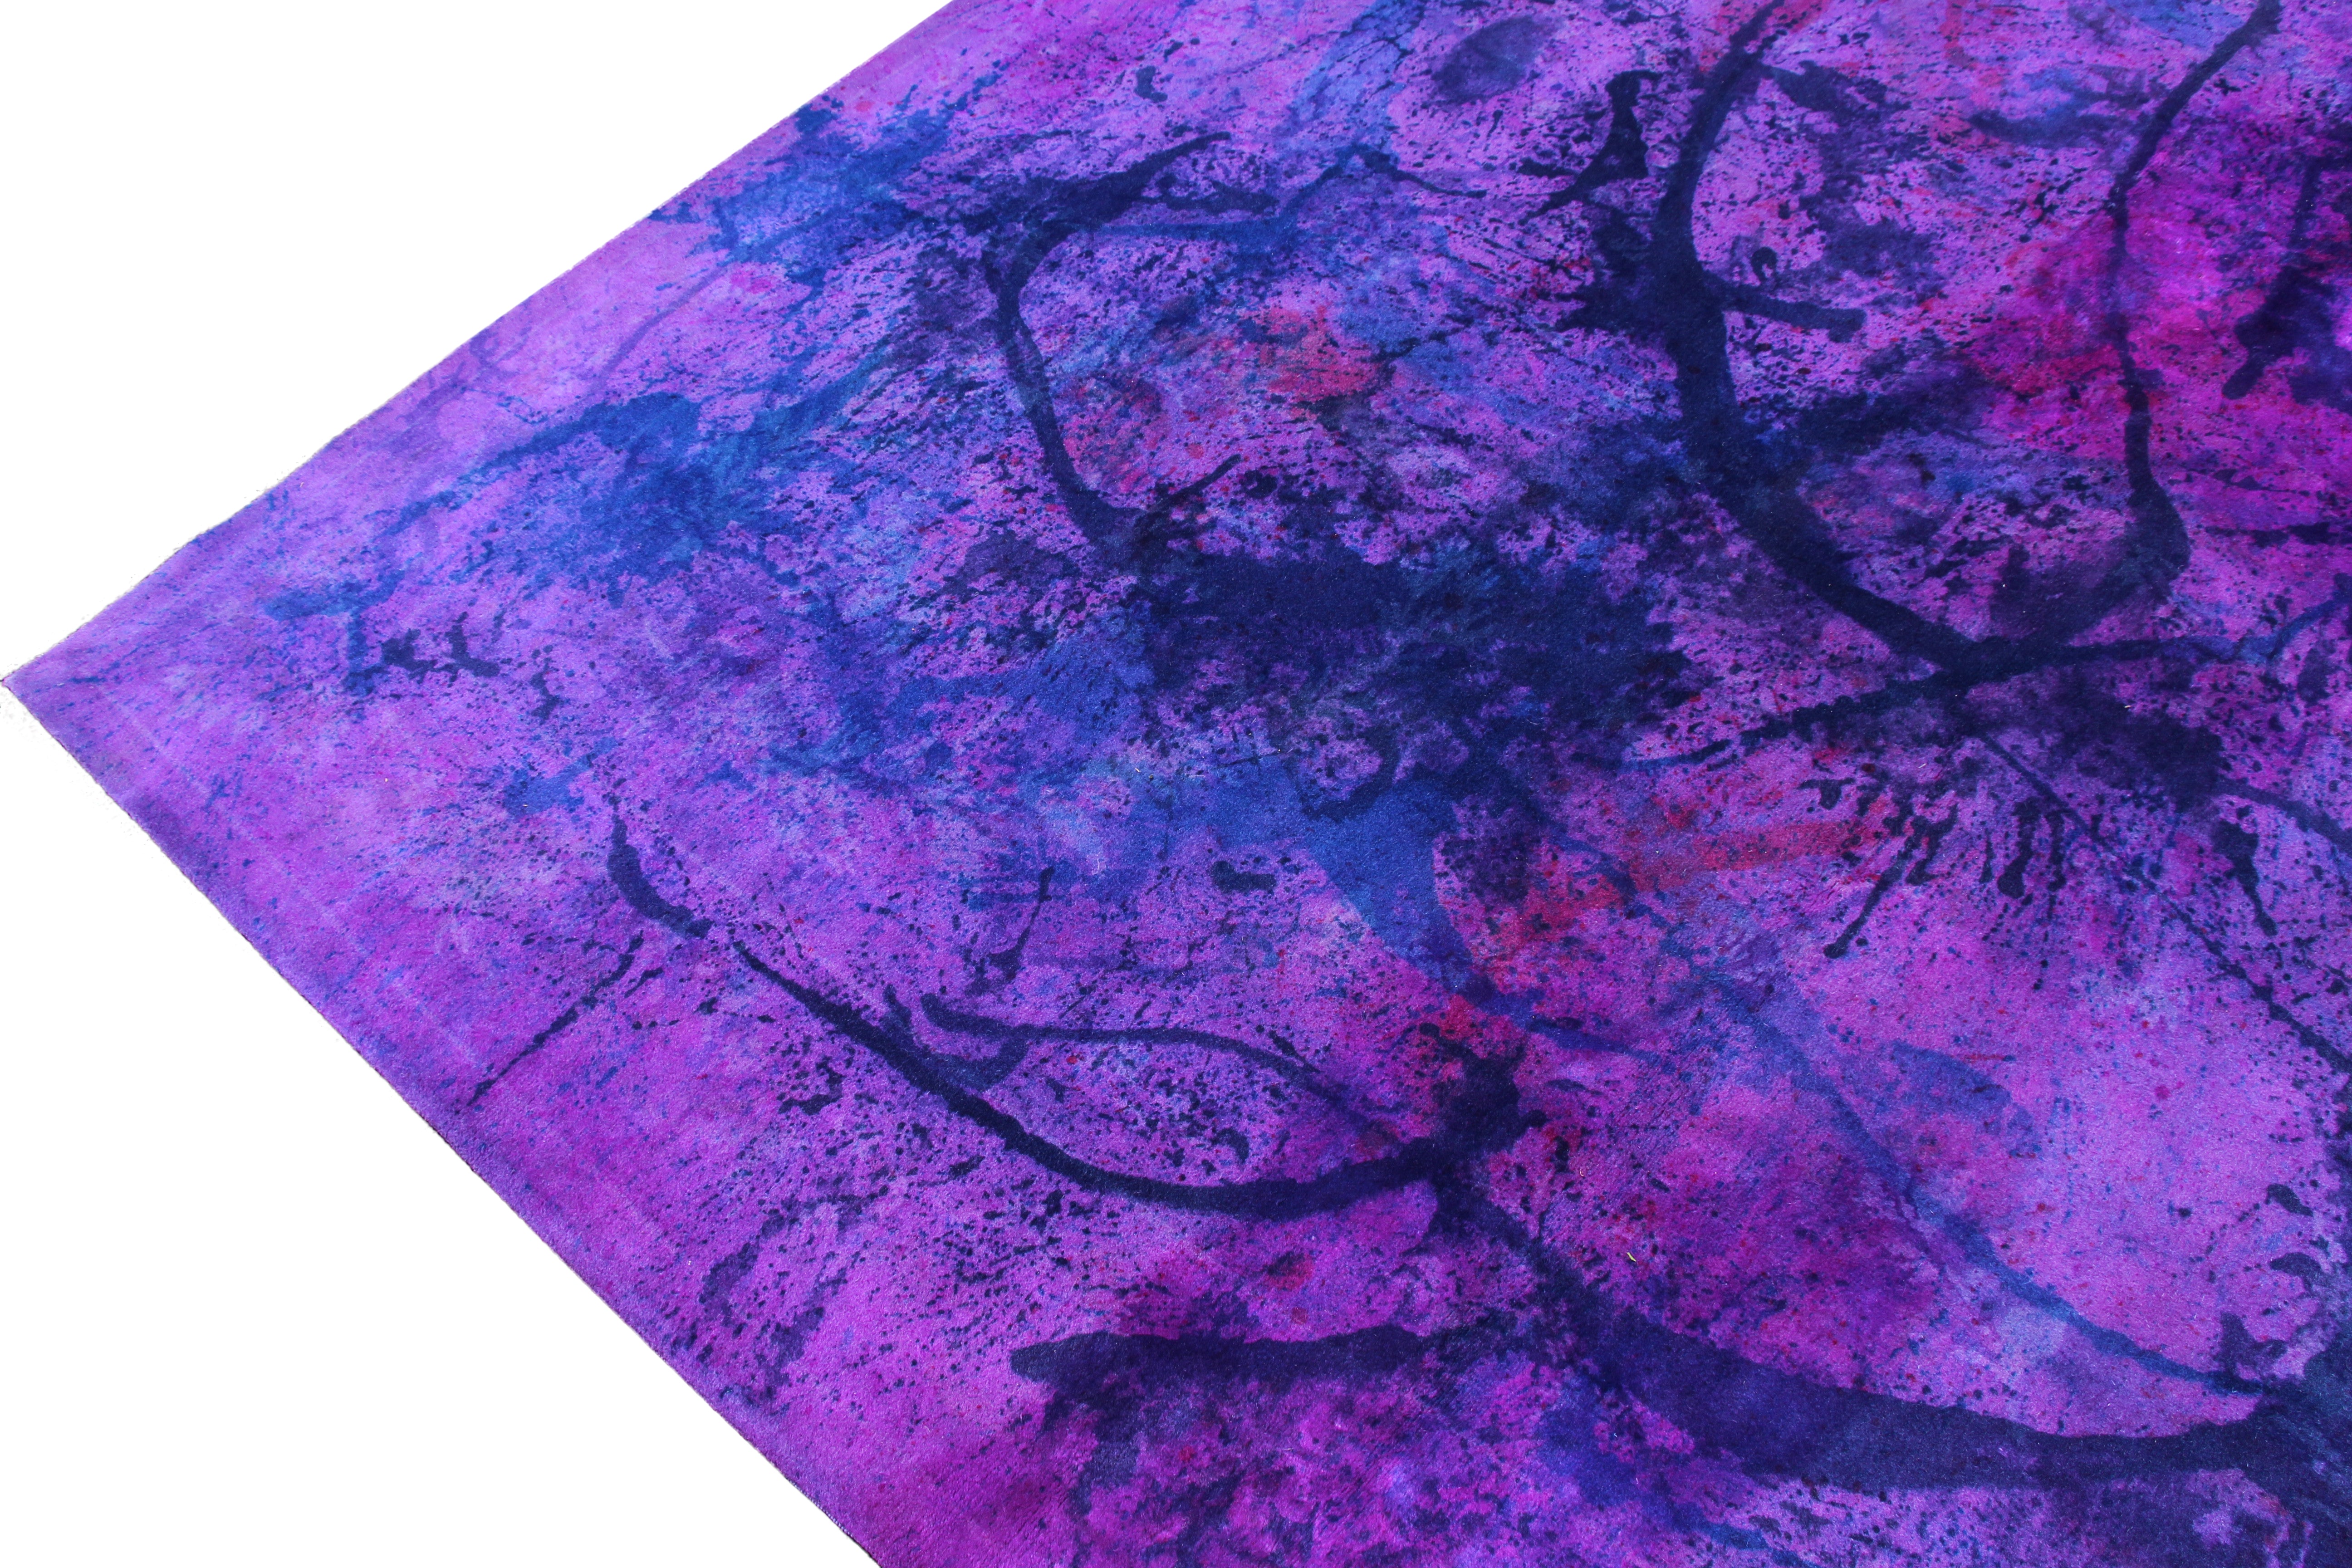 10×14 Overdyed Purple Paint Splash One of a Kind Rug 2857 - west of hudson